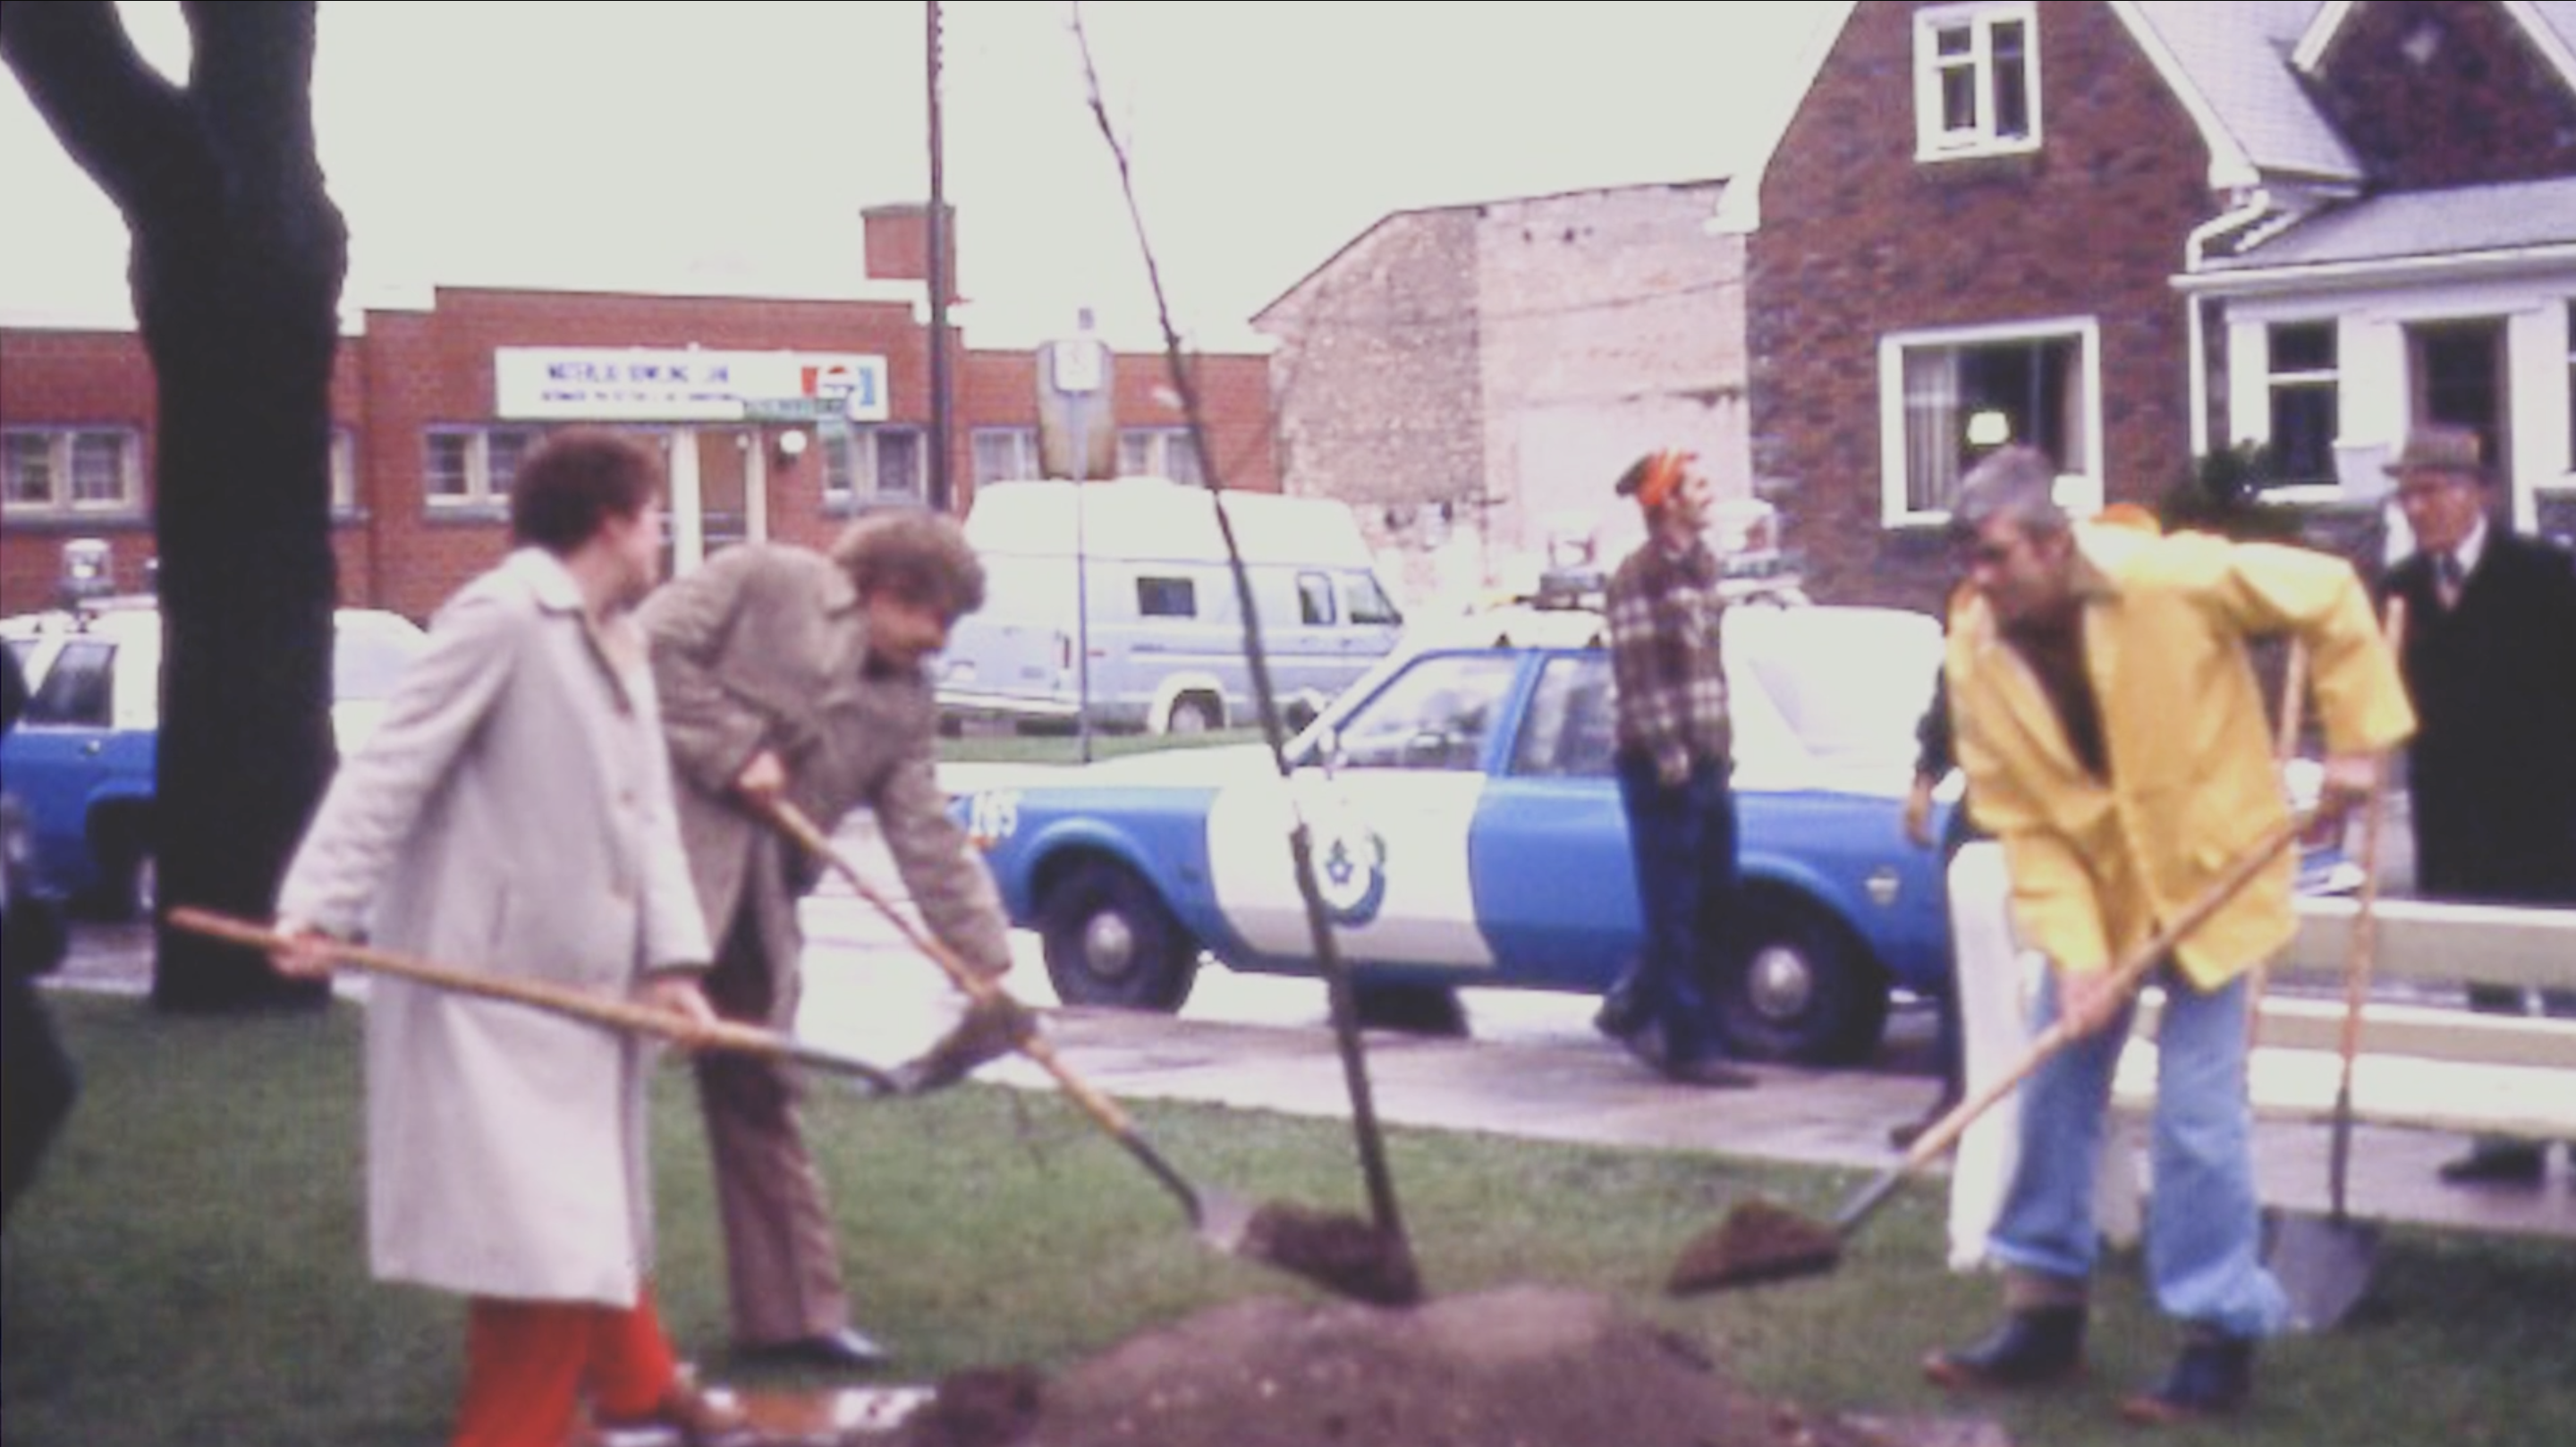 4 people digging in the 1970s